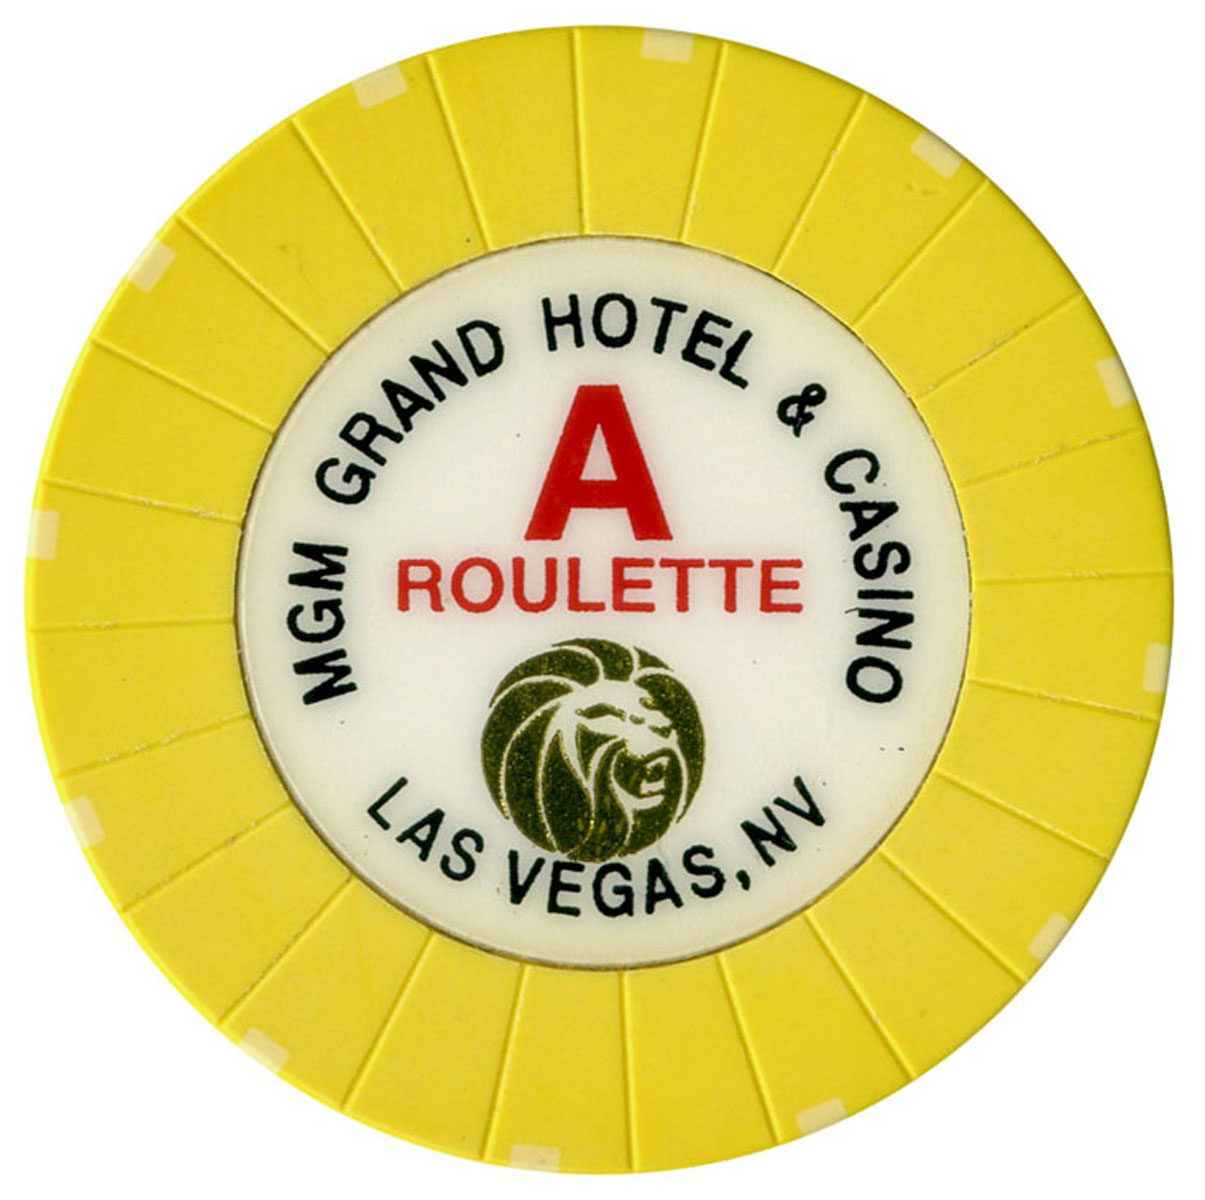 MGM Grand Hotel, Las Vegas Table A Series 301 Roulette Chipper Club